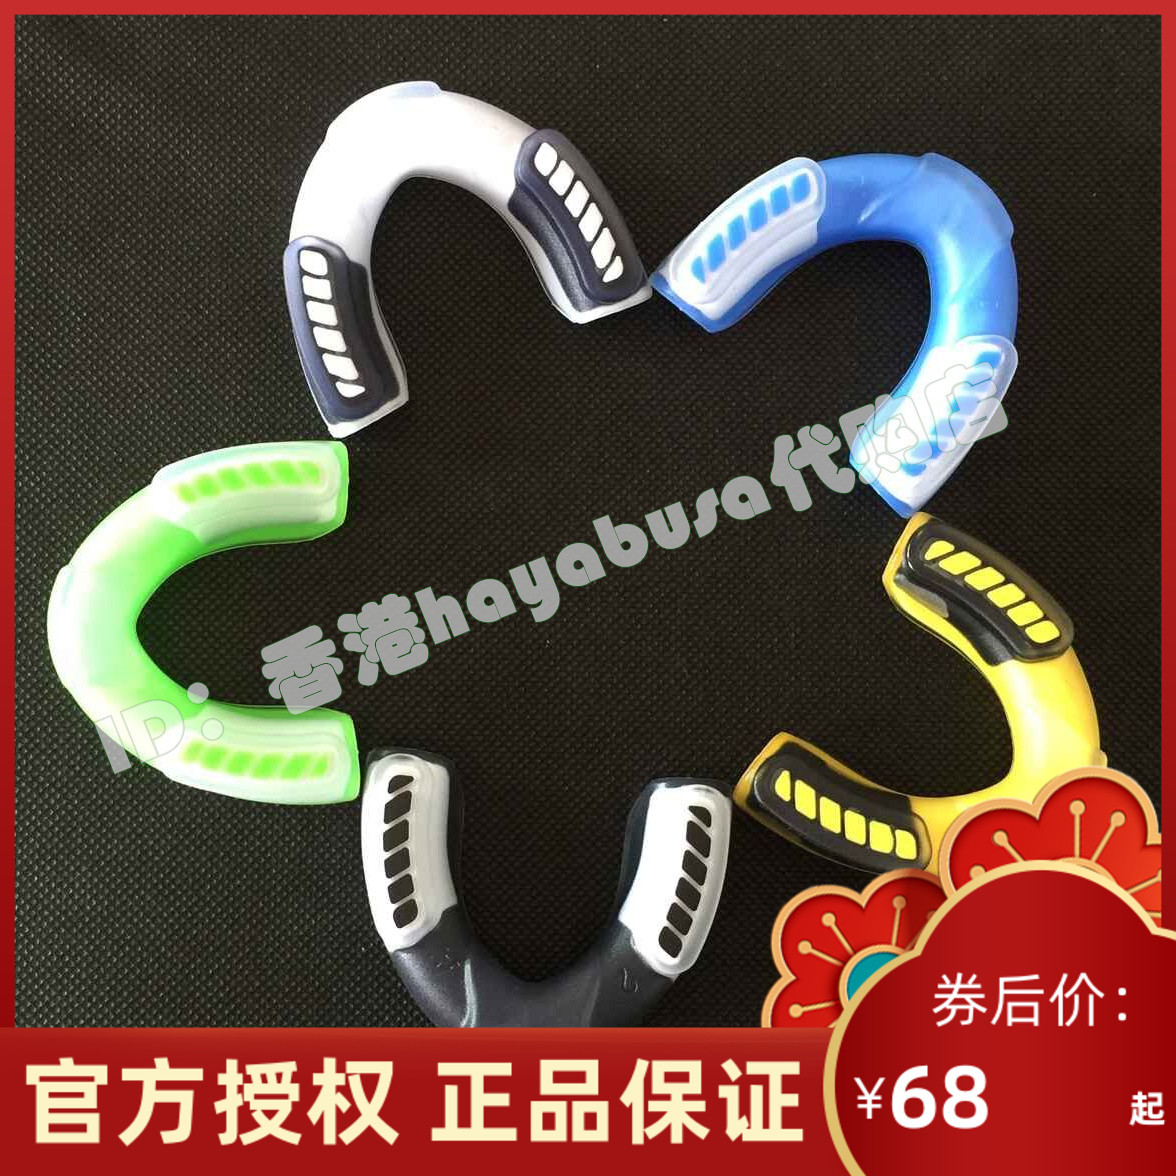 Braces Muay Thai FistIngIng Braces Teeth Braces Fighting Fitness Competition Sports GearBoxing Equipment Fighting Protectors